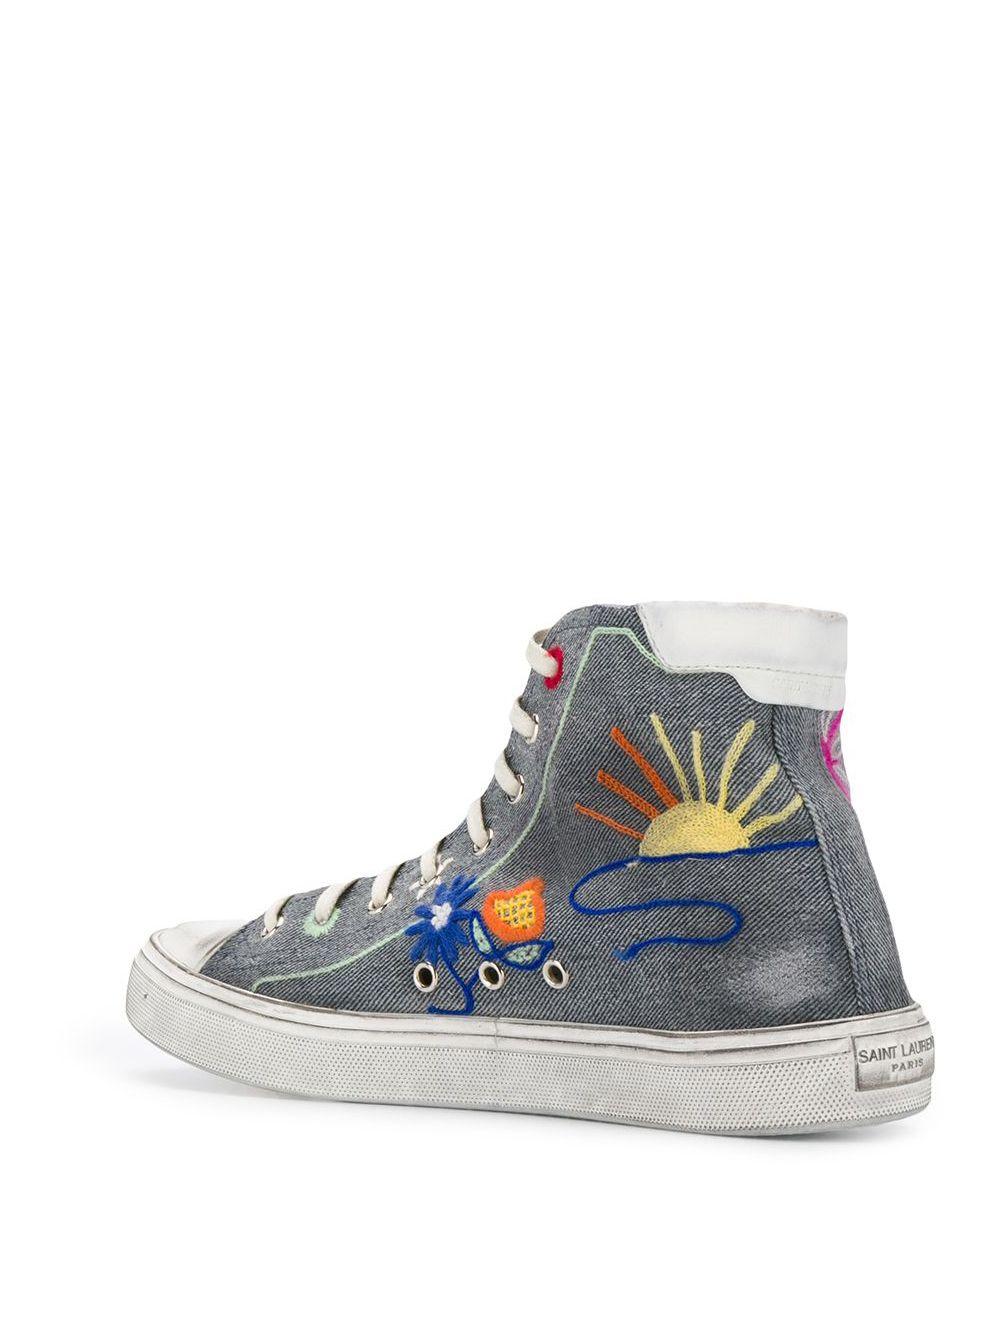 Gray Saint Laurent Tropical-Embroidered High Top Bedford Distressed Sneakers Size 38